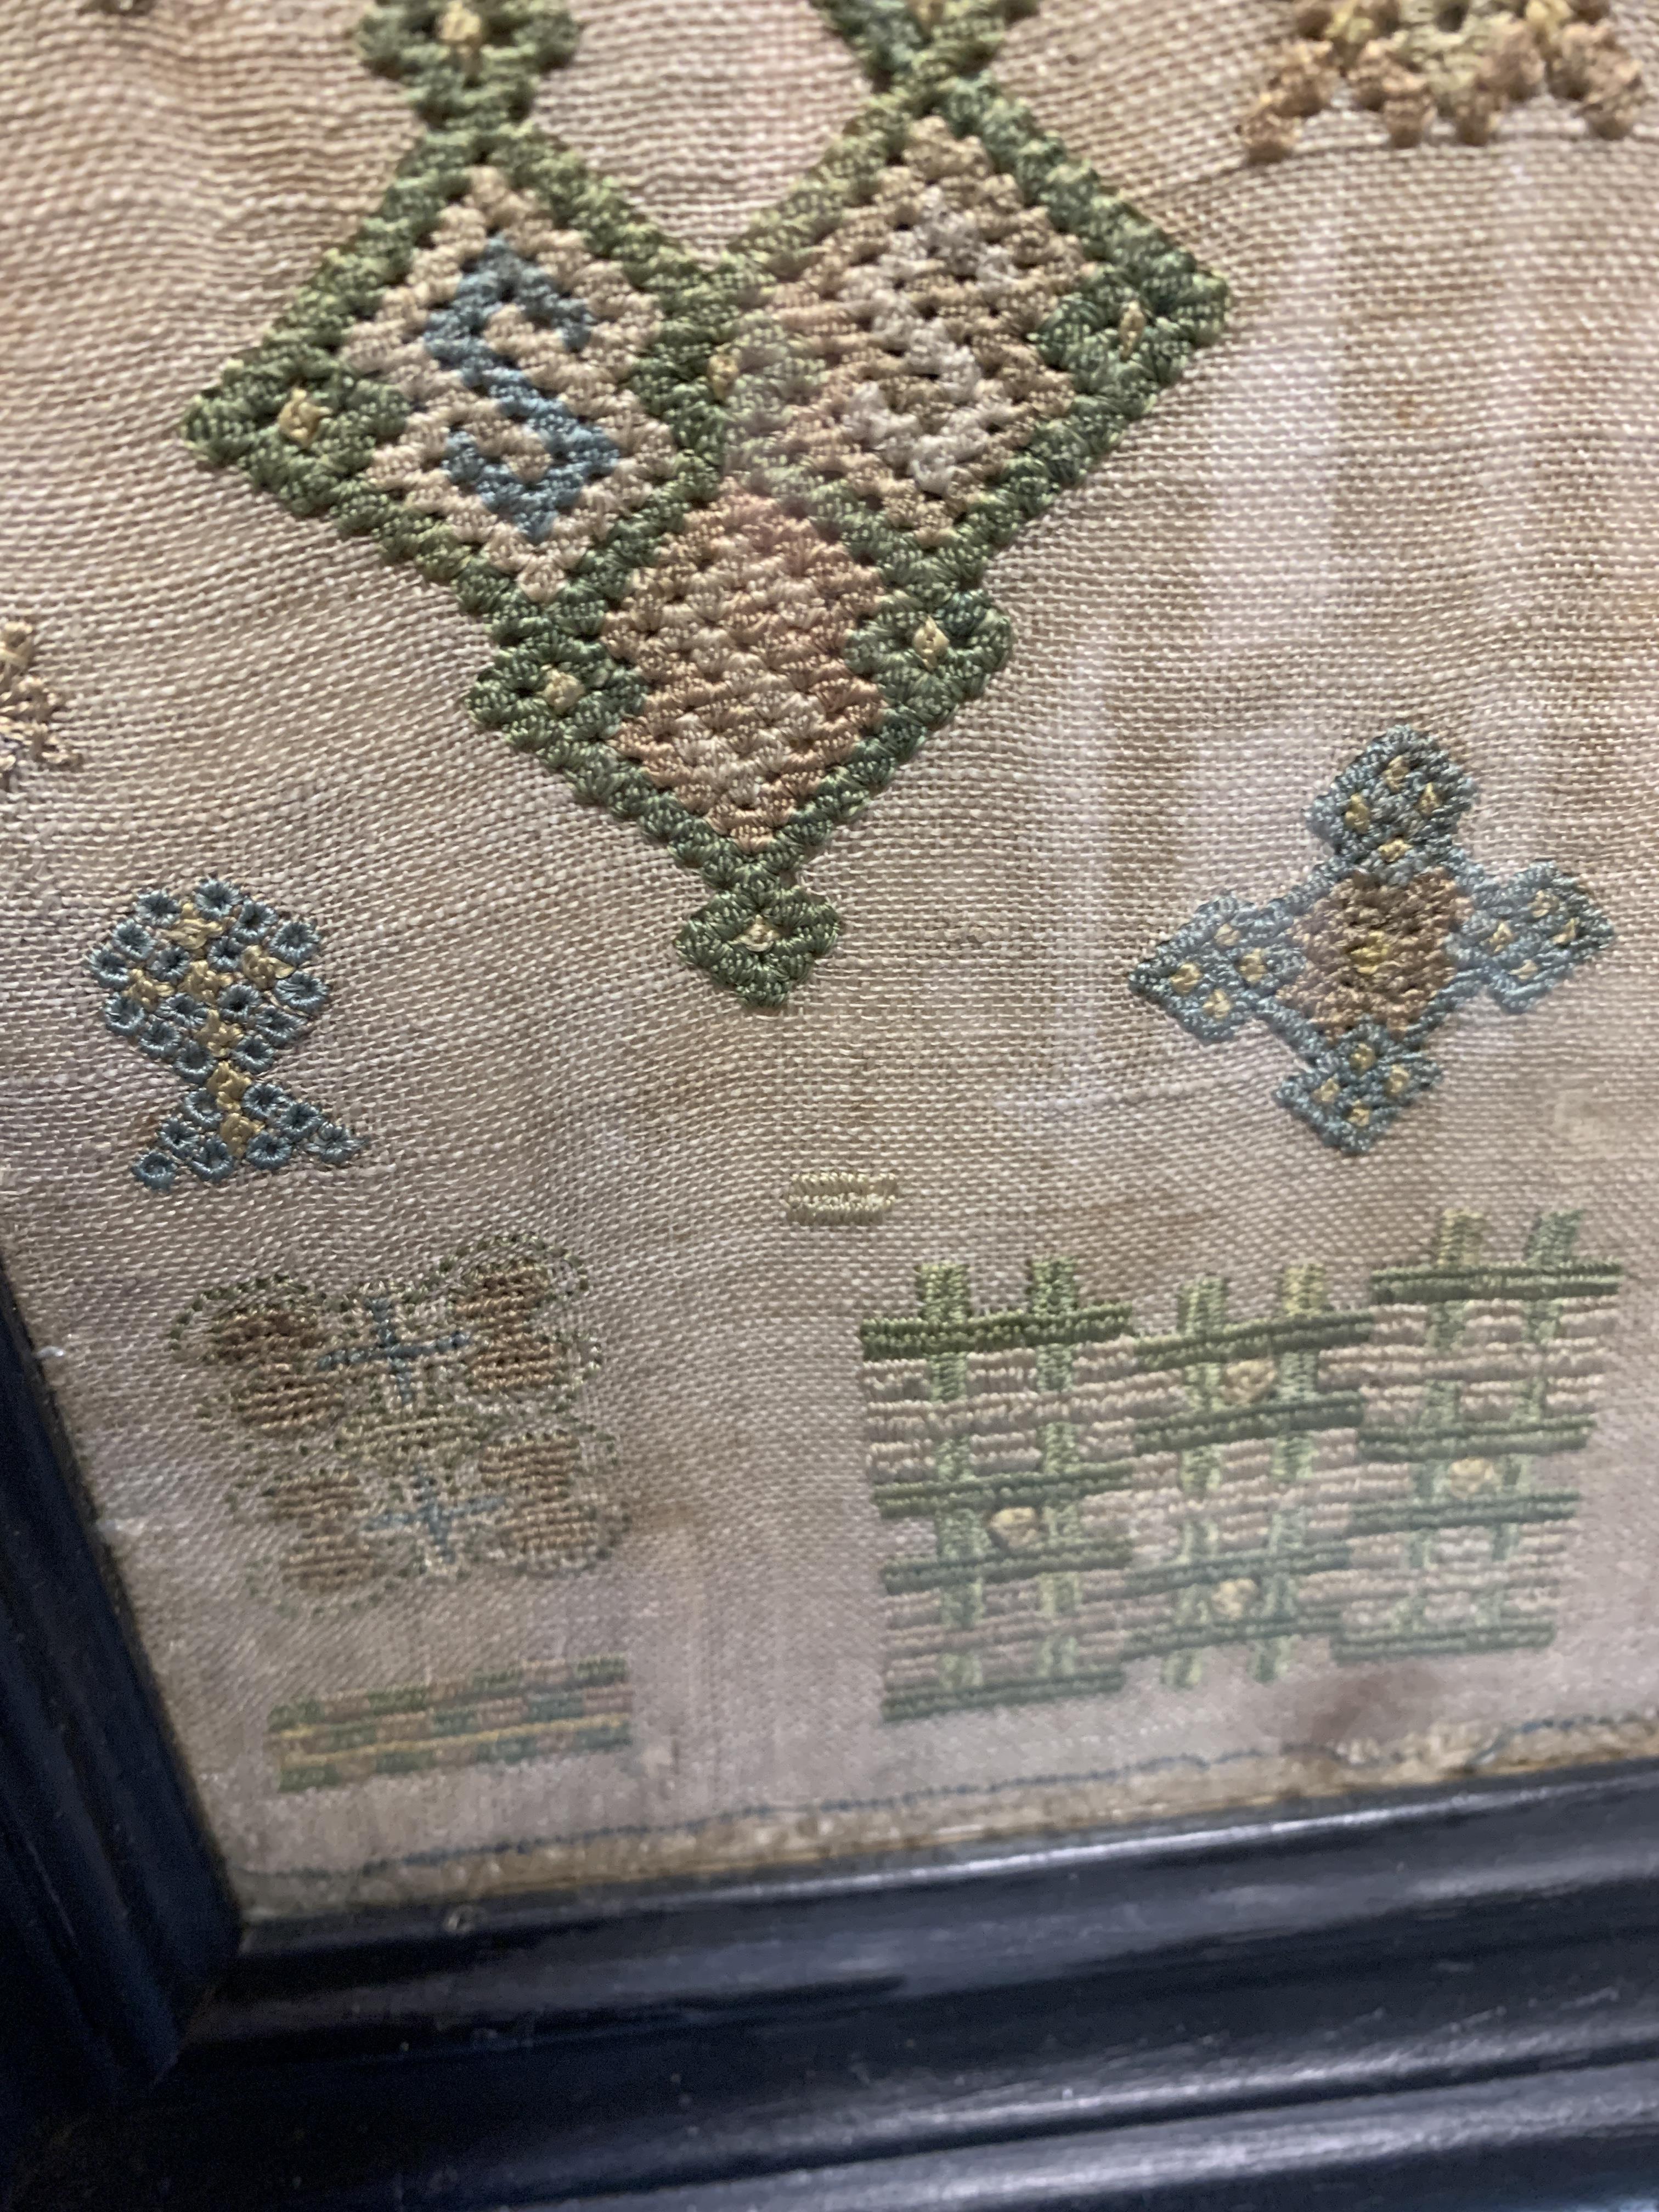 A RARE NEEDLEWORK SPOT SAMPLER BY GRACE THRUSTON, MID-17TH CENTURY worked with polychrome silks on - Image 12 of 15